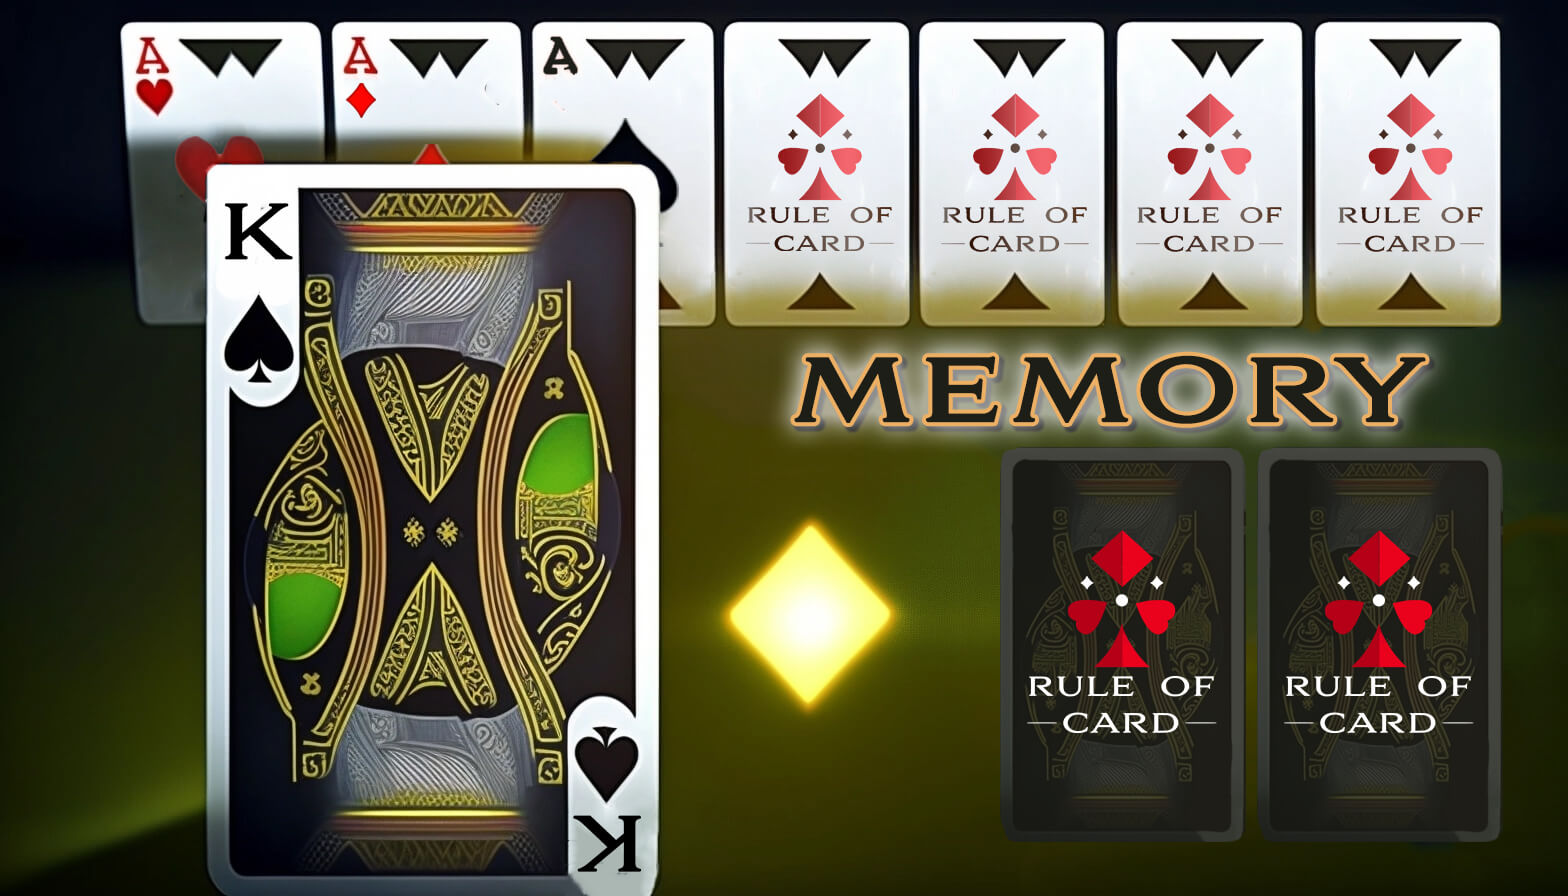 Playing the card game Memory